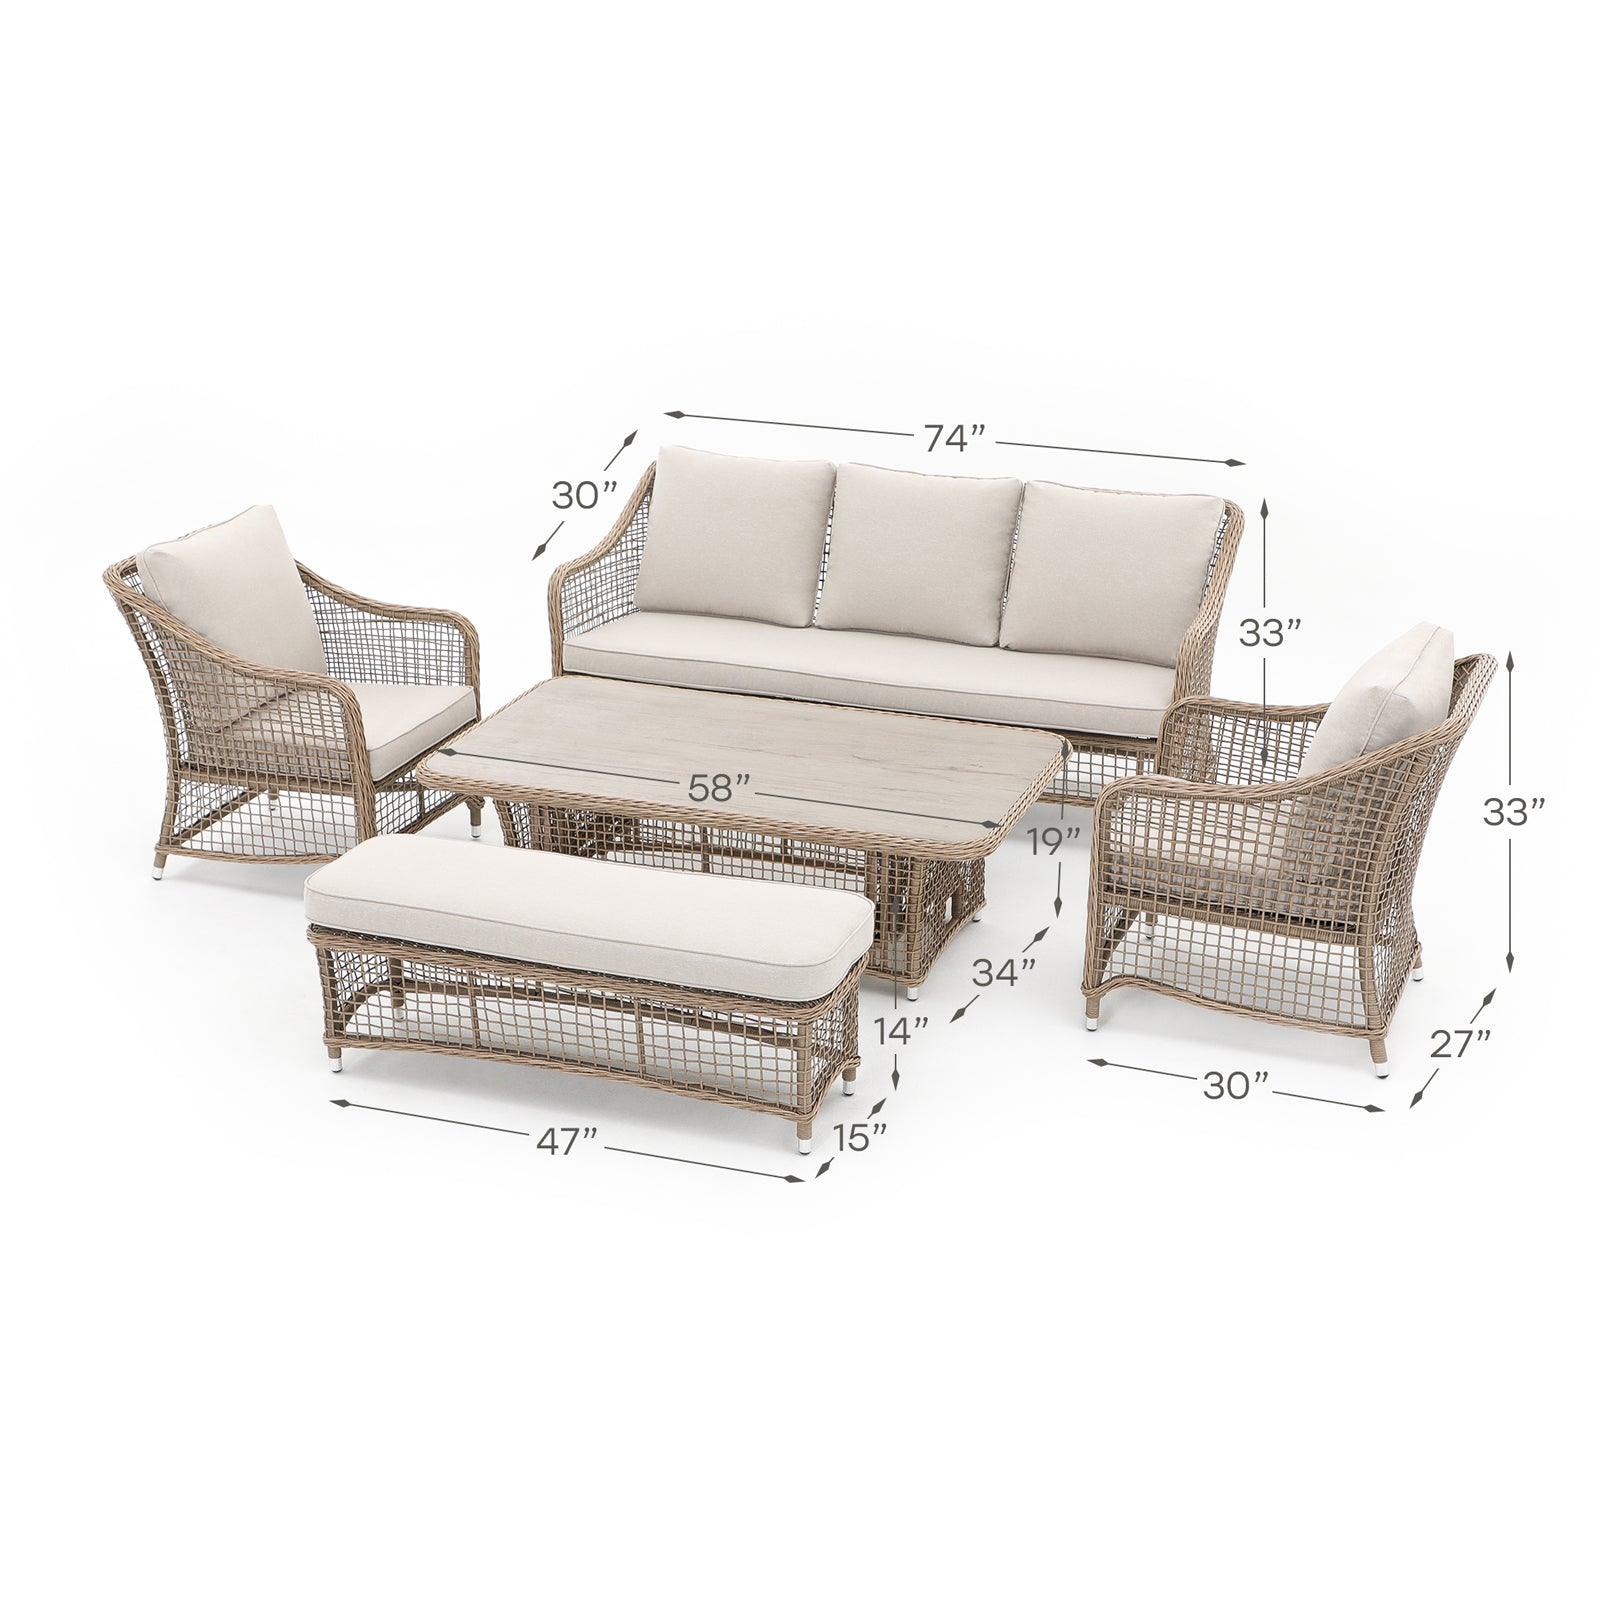 Irati 5-Piece natural color wicker outdoor seating set with aluminum frame, Creamy-white cushions, 1 three-seater sofa, 2 armchairs, 1 bench, 1 lift top dining table,dimension information- Jardina Furniture#color_Natural